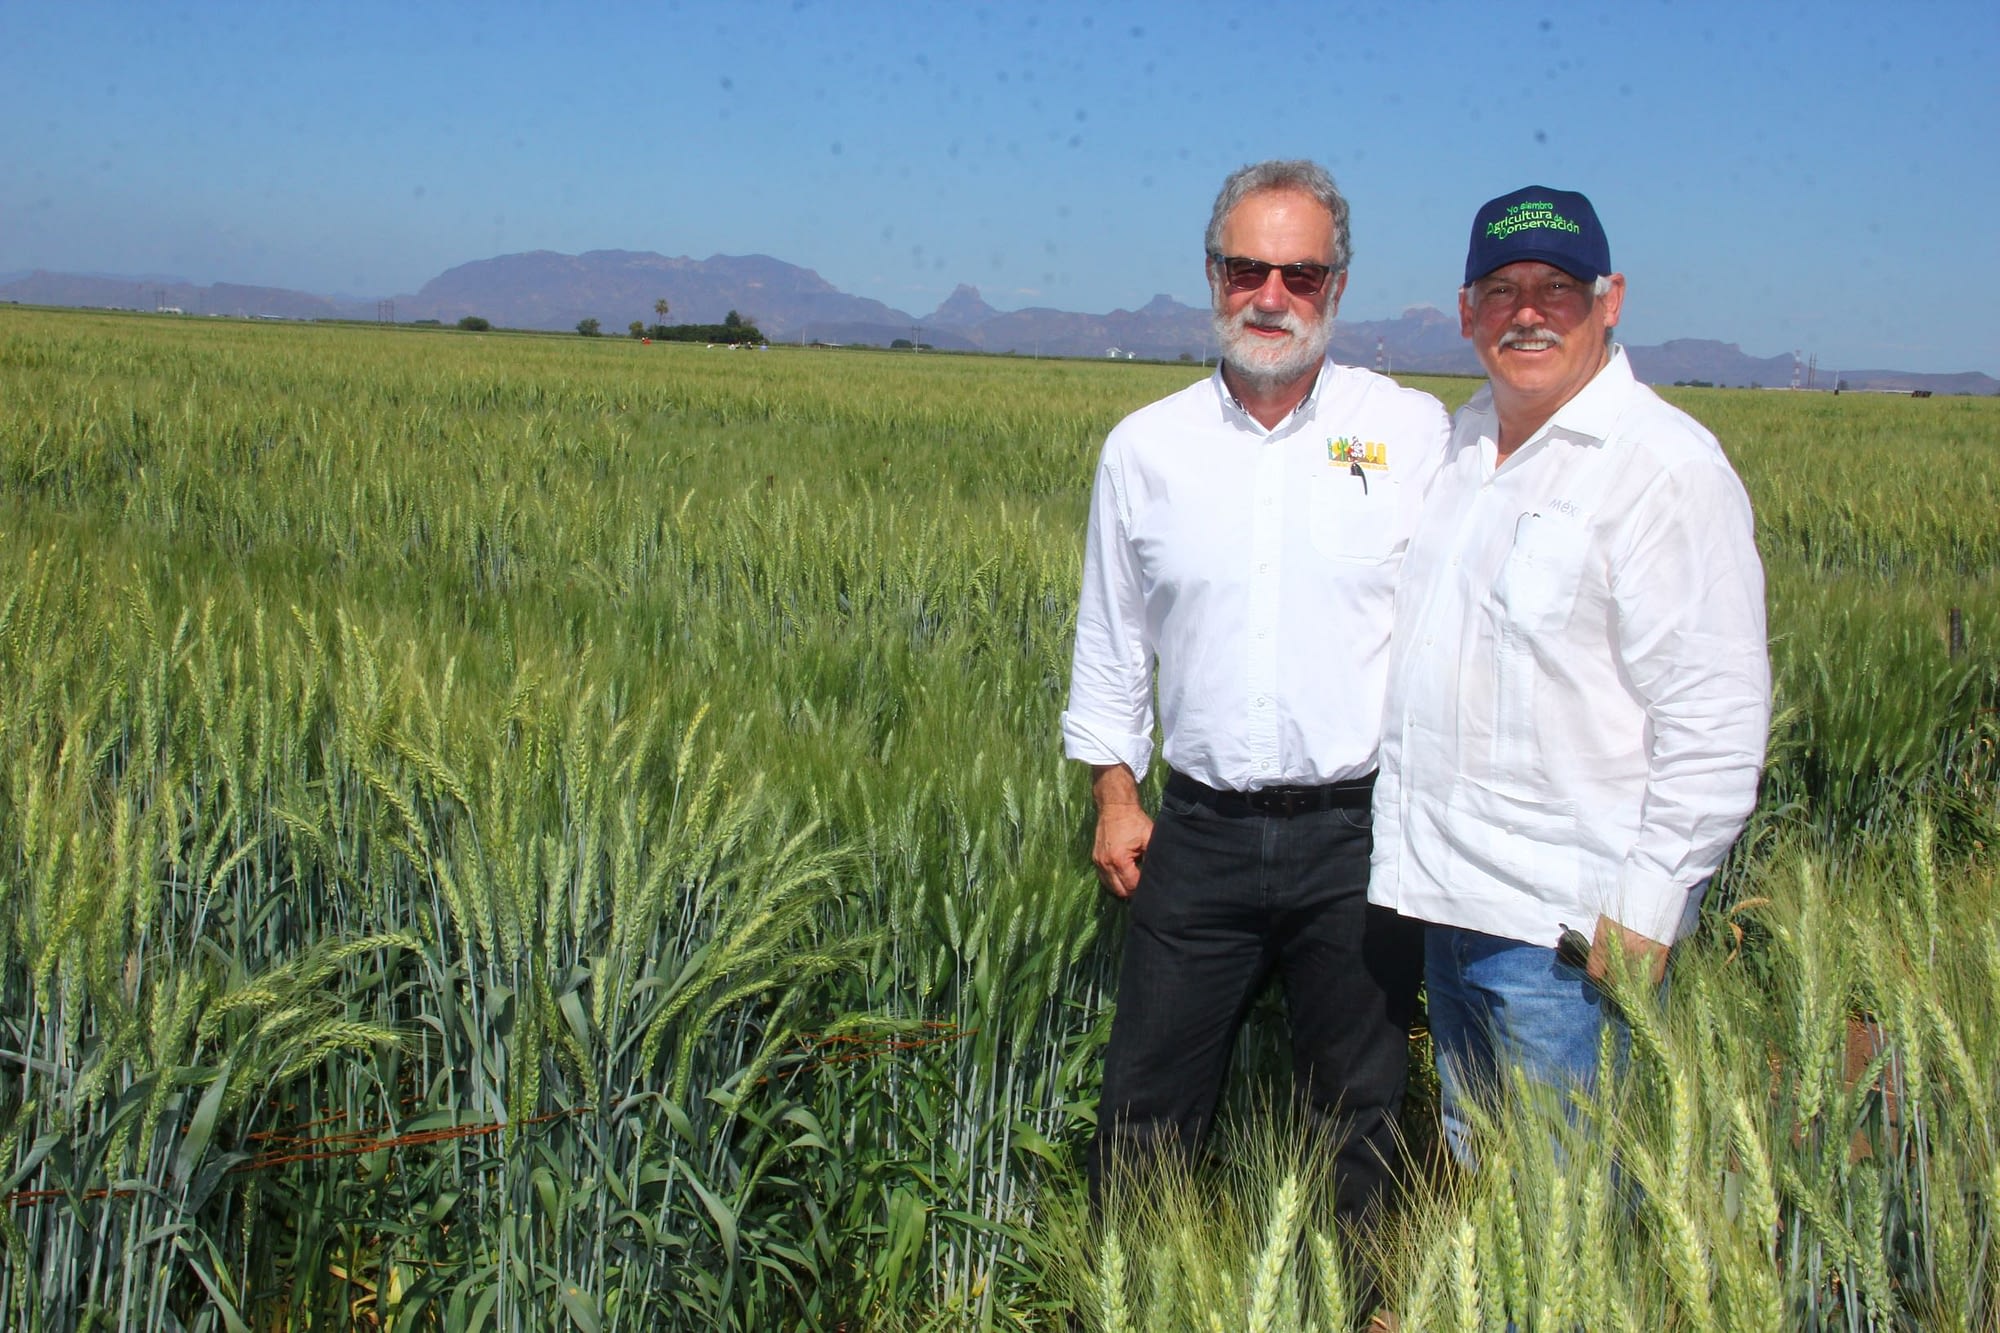 Secretary Villalobos (right) and Hans Braun, Program Director for CIMMYT's Global Wheat Program, stand for a photograph in a wheat field at the experimental station in Obregón. (Photo: Ernesto Blancarte)